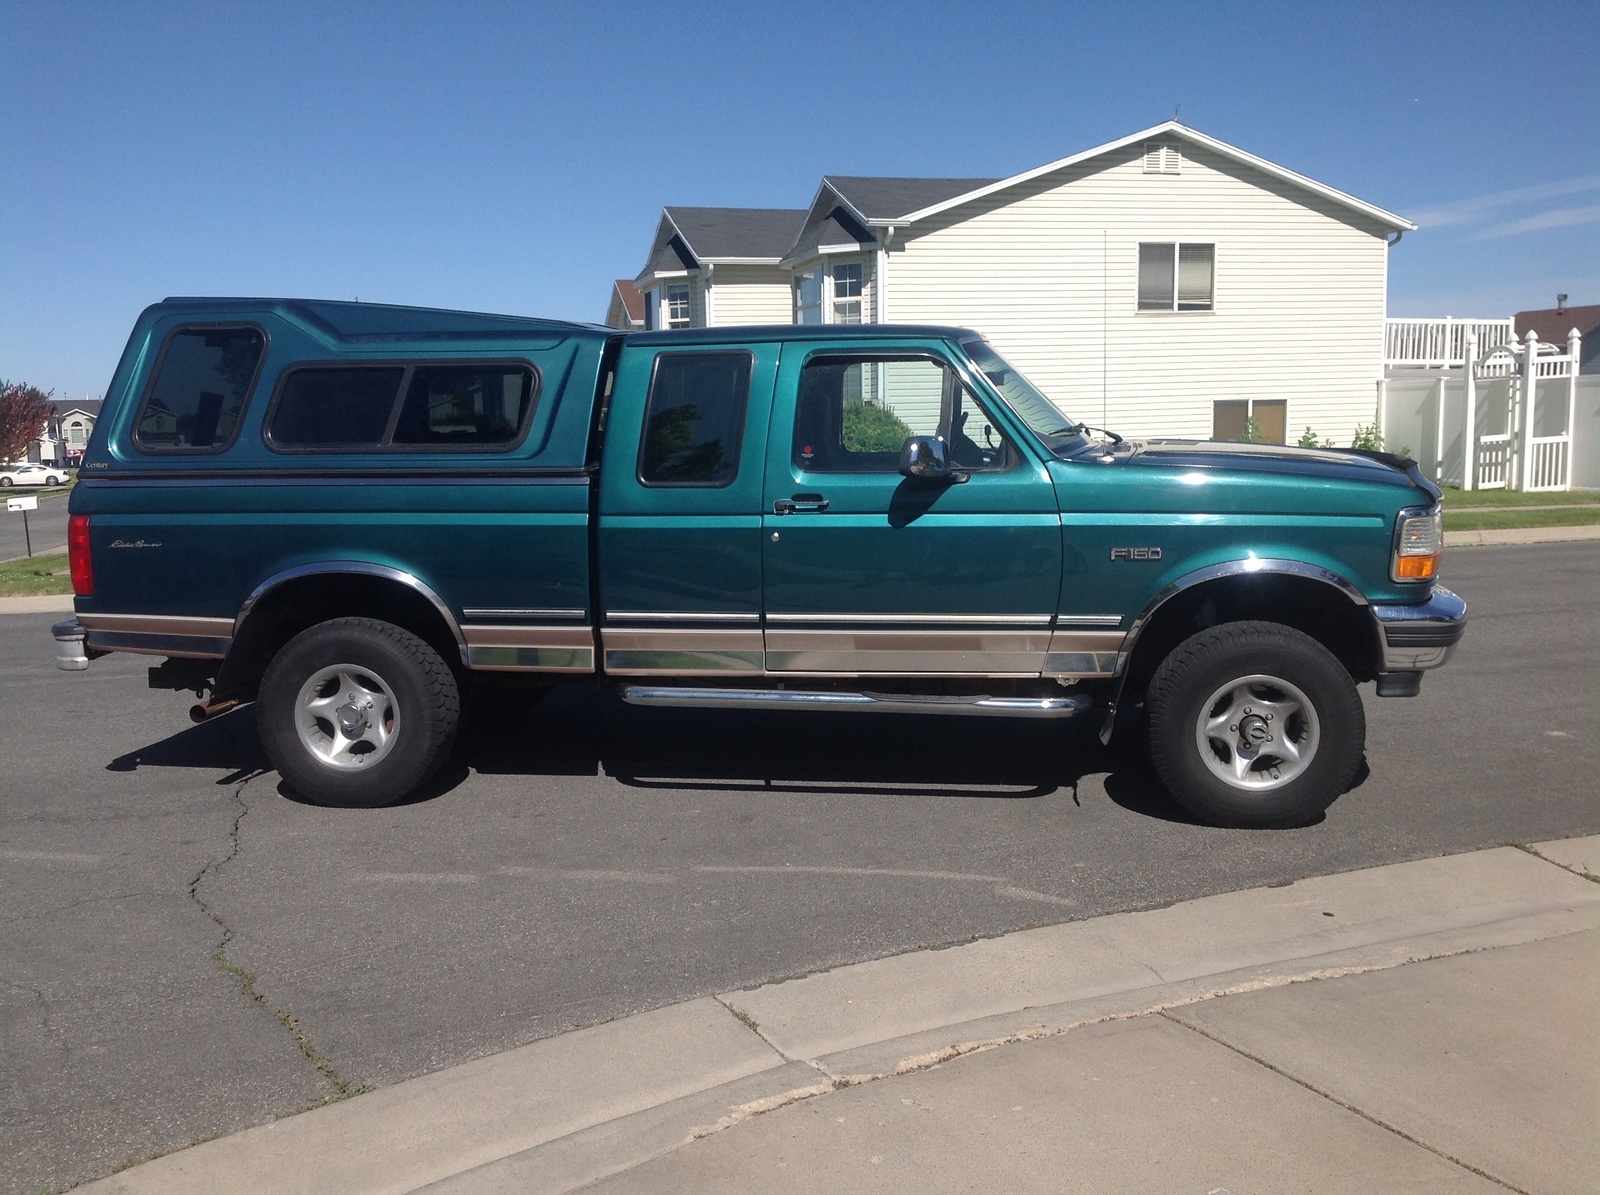 1996 Ford f150 extended cab #2